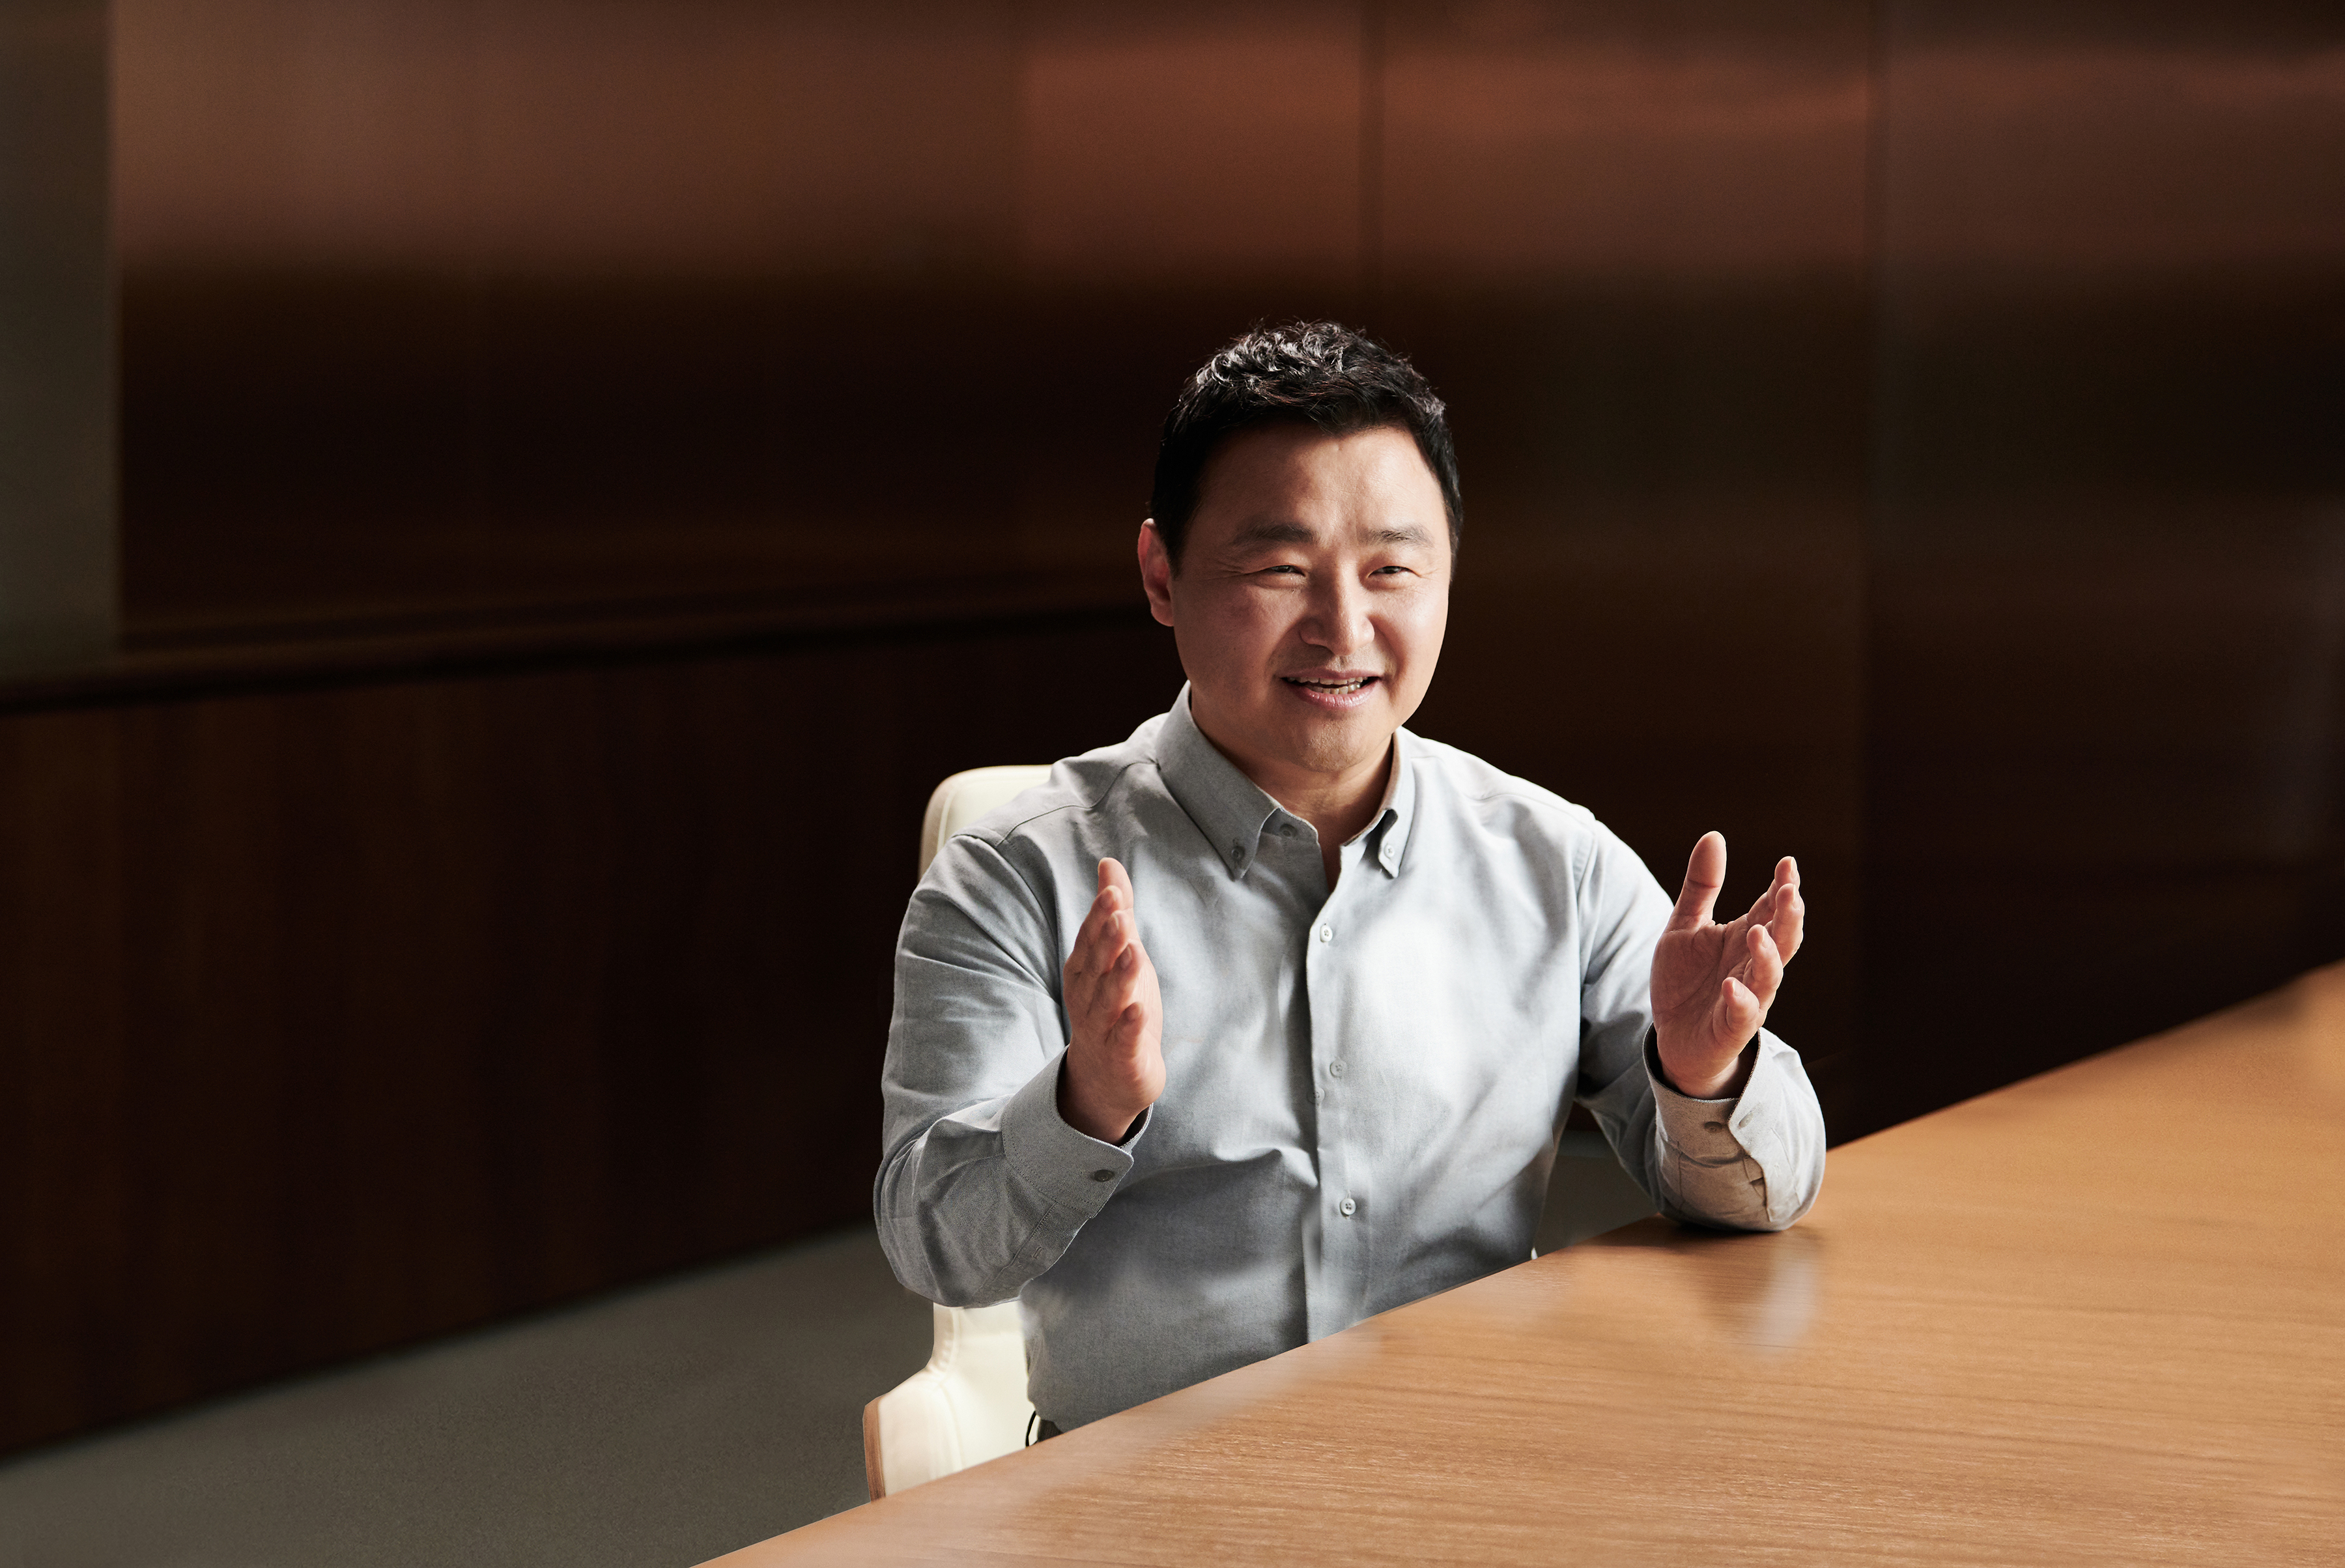 President & Head of Mobile TM Roh discusses some of the meaningful innovations that have taken place since he took over the reins at Samsung Mobile.